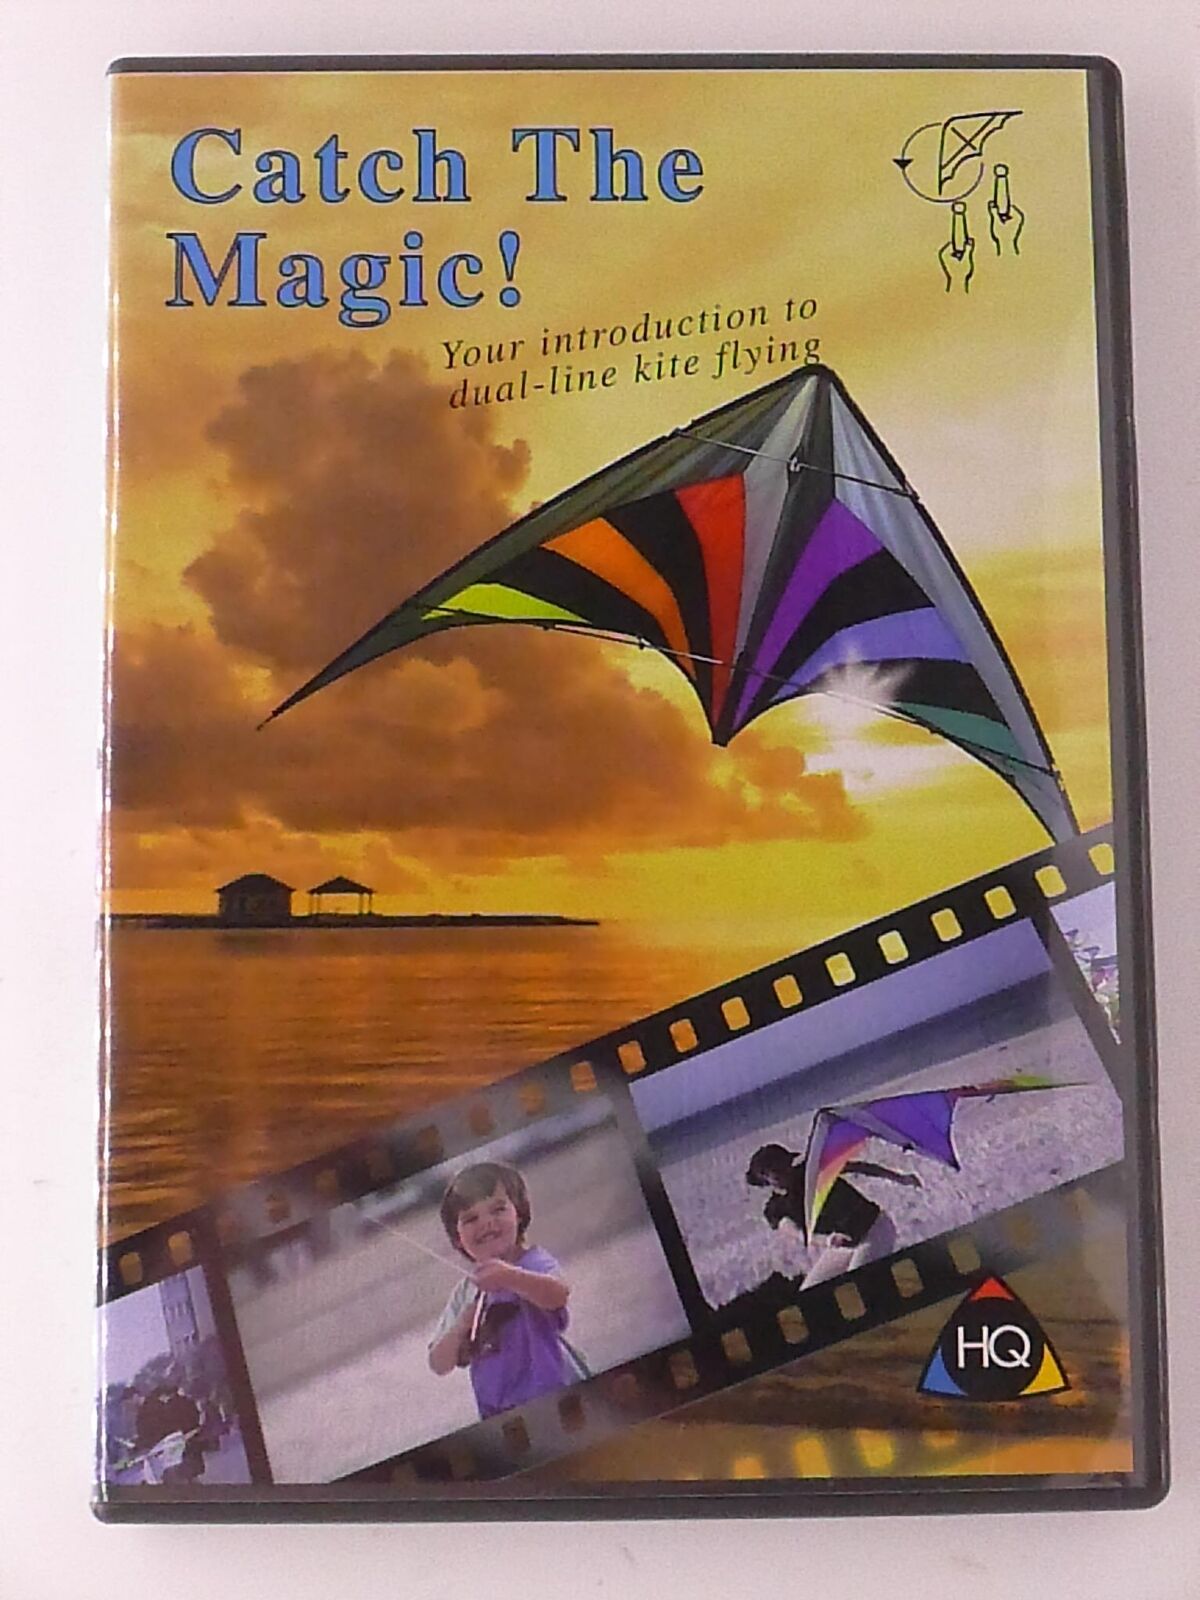 Catch the Magic - Introduction to dual-line Kite Flying (DVD) - J1105